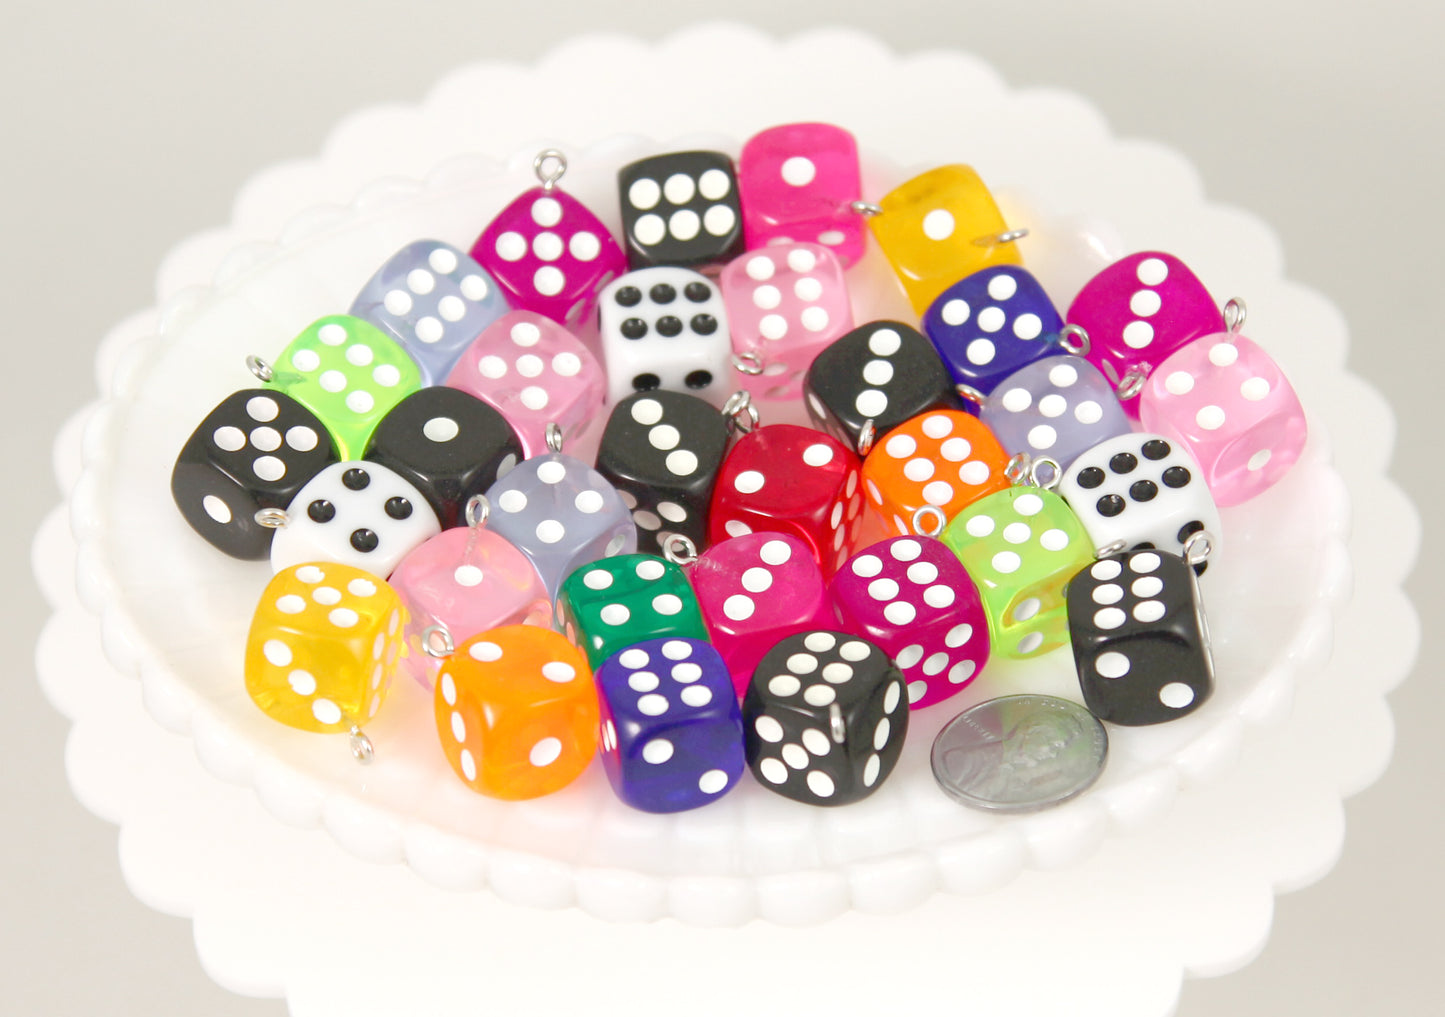 Dice Charms - 14mm D6 Dice Colorful Resin Charms Acrylic or Resin Pendants - 12 pc set